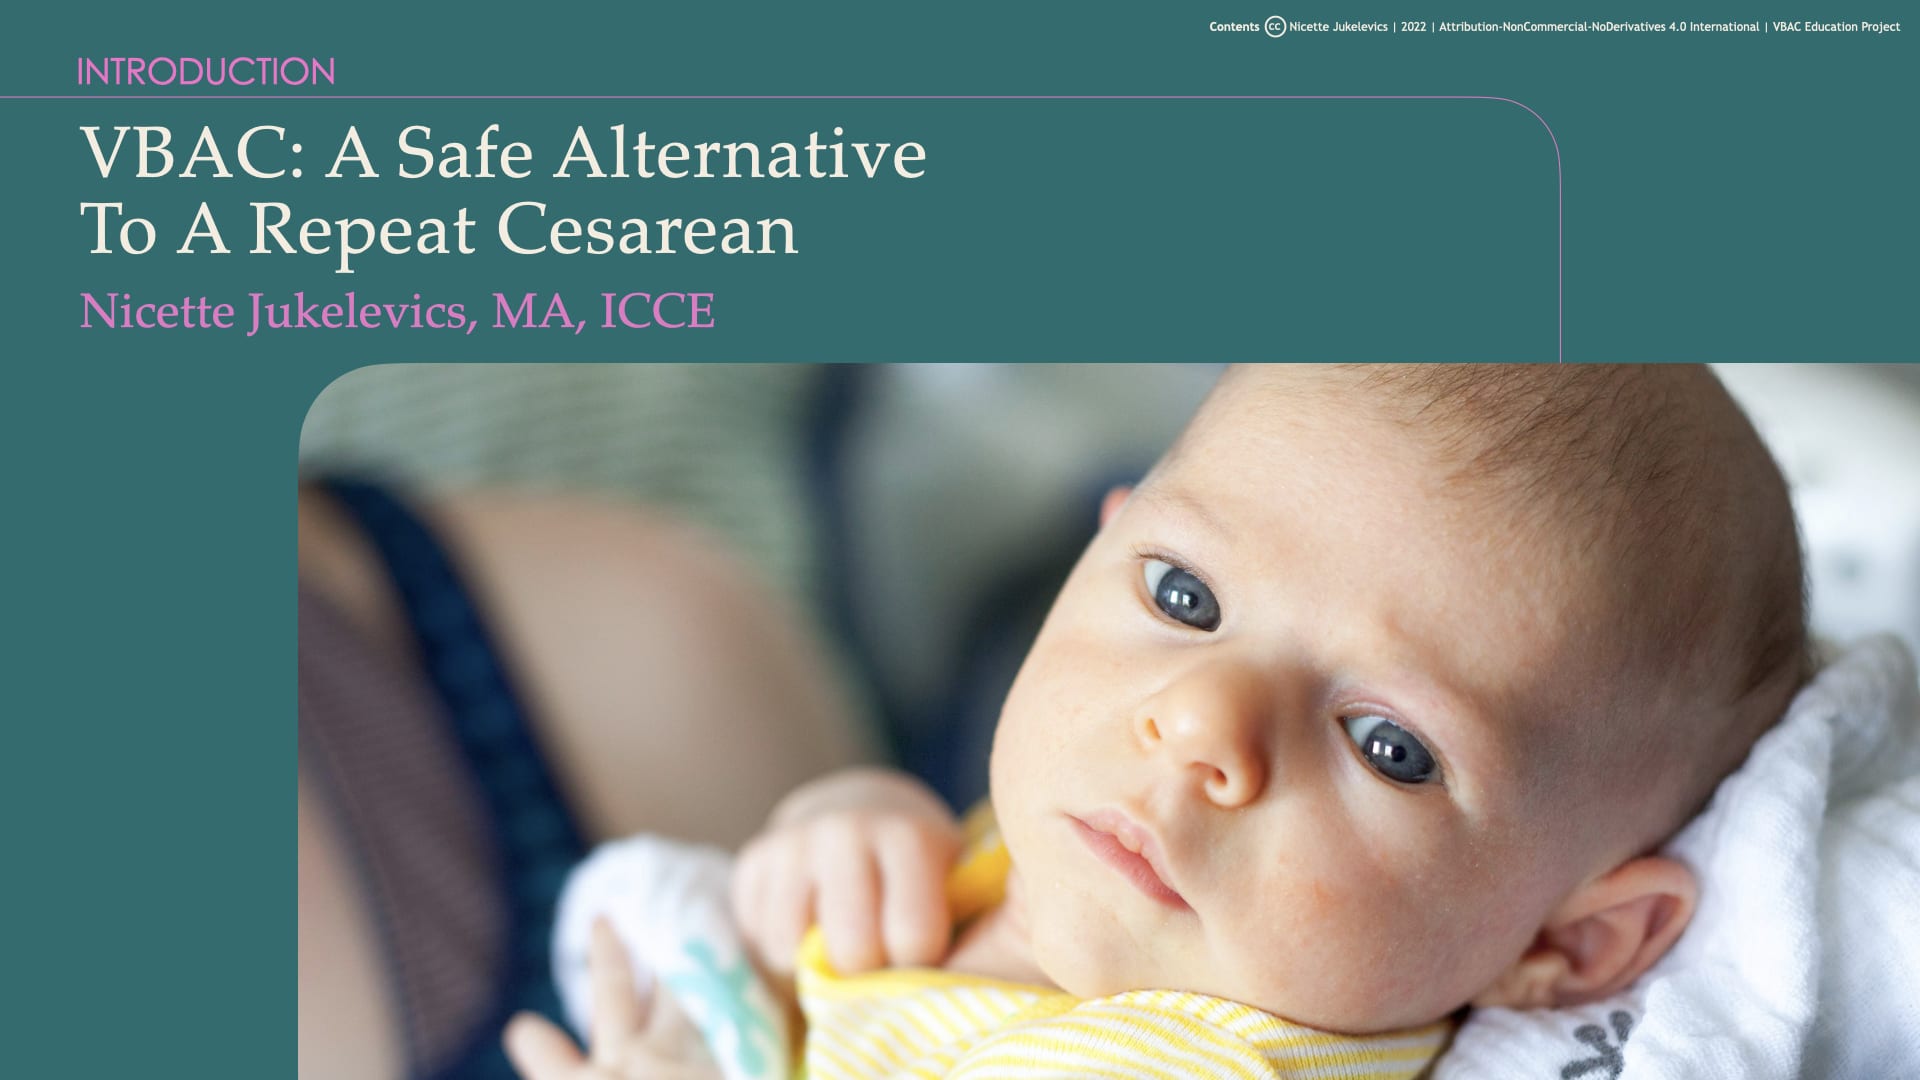 Introduction: VBAC: A Safe Alternative To A Repeat Cesarean by Nicette Jukelevics, MA, ICCE